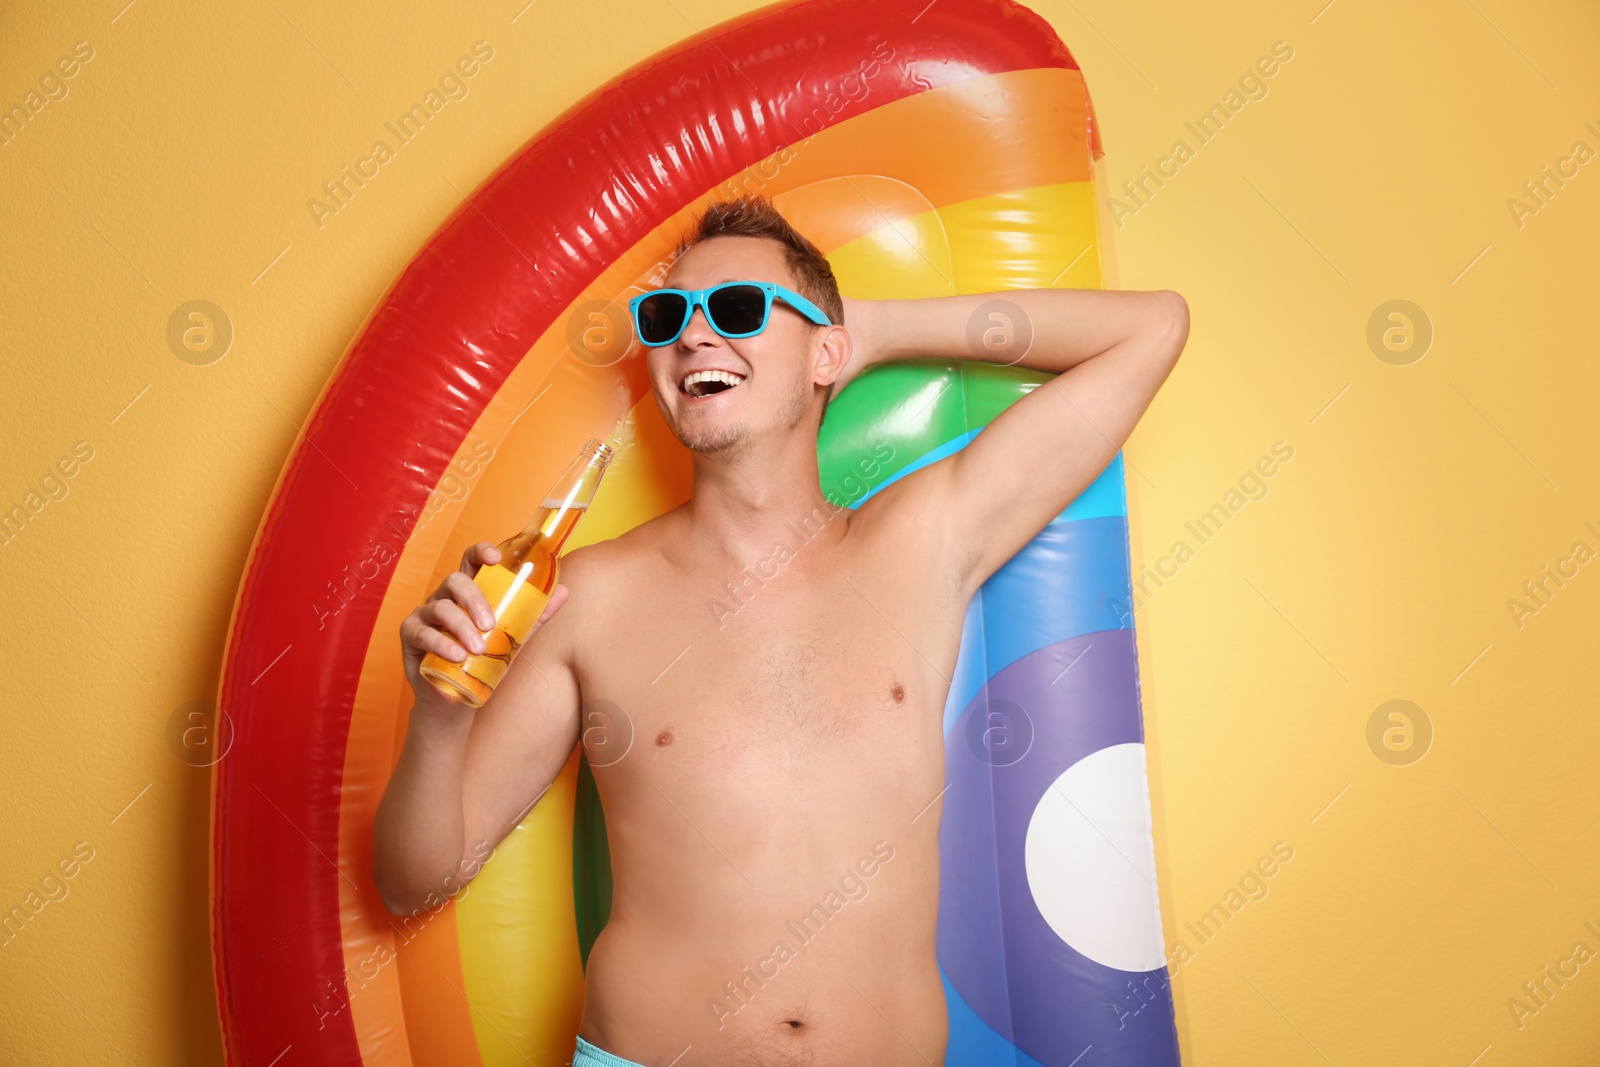 Photo of Shirtless man with inflatable mattress and bottle of drink on color background